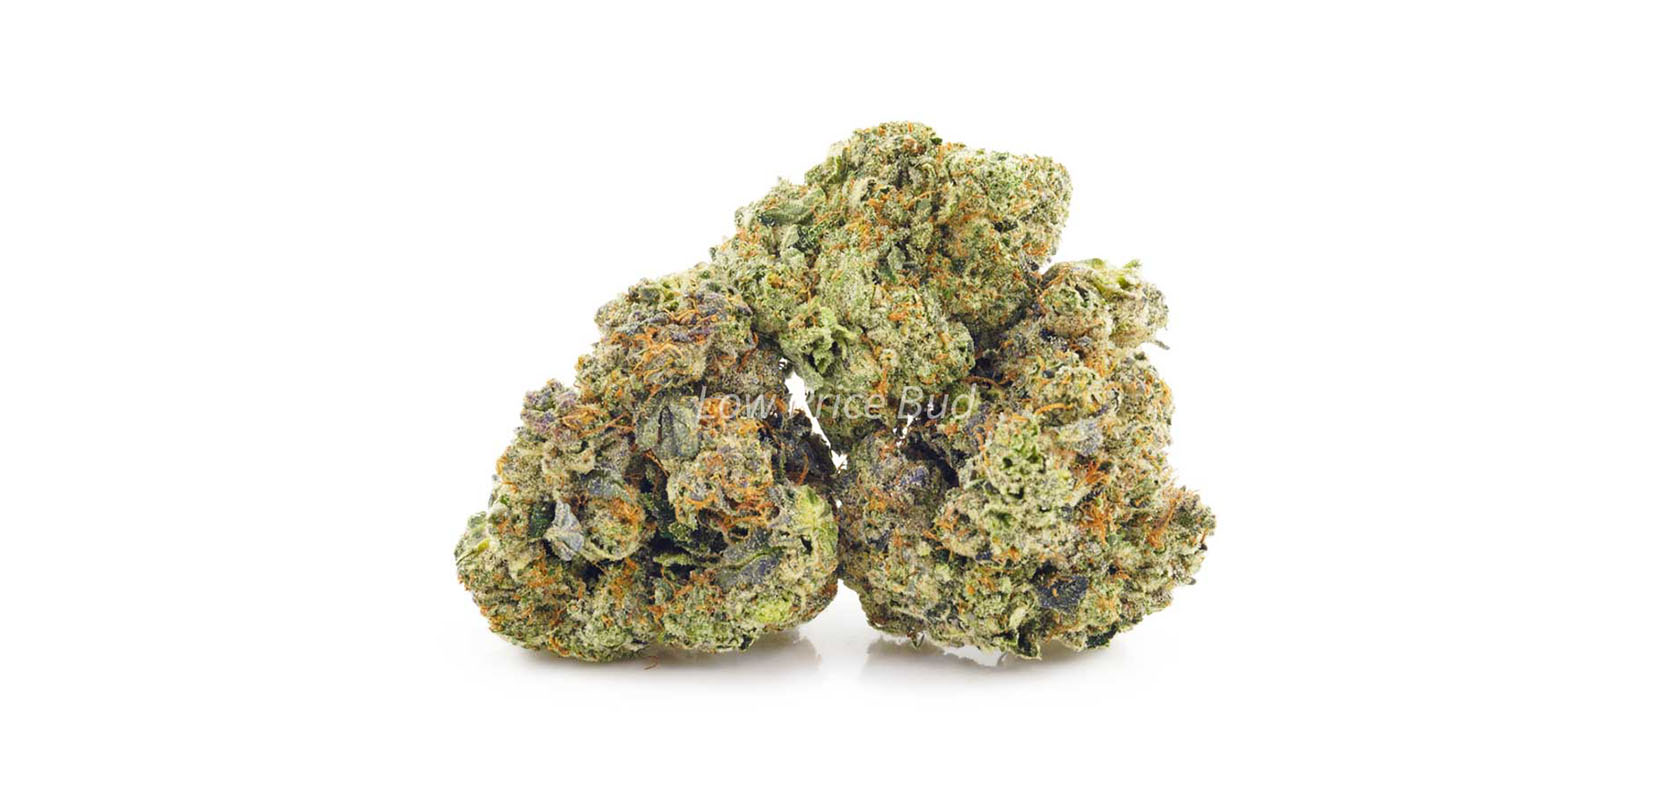 Buds of Astroboy weed online Canada. Strongest sativa strains from online dispensary for BC cannabis.